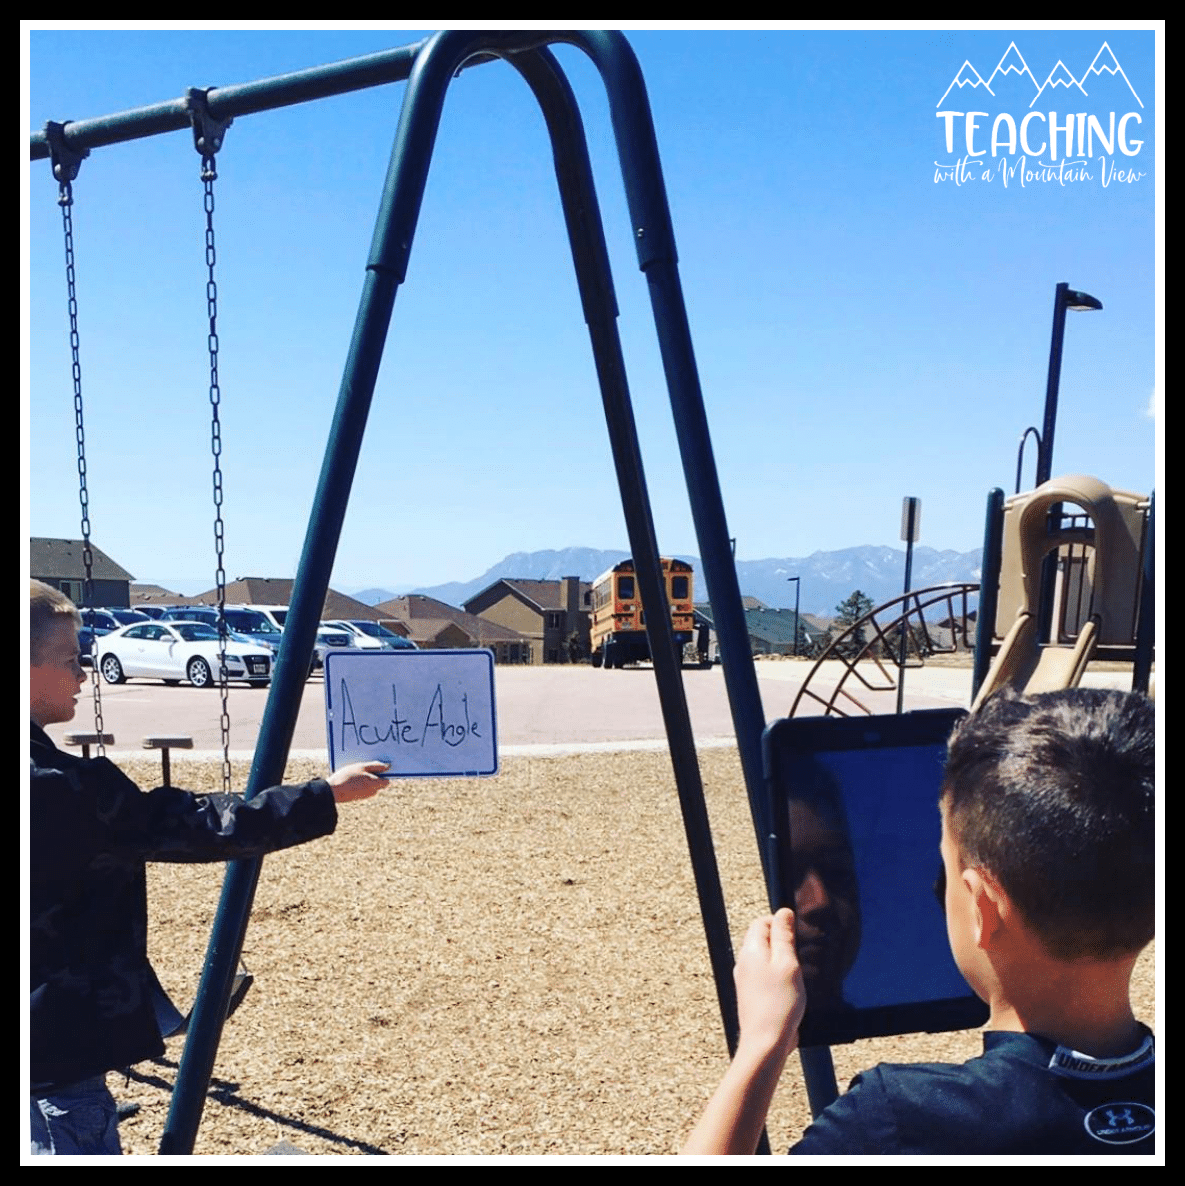 teaching outdoors with the swing sets